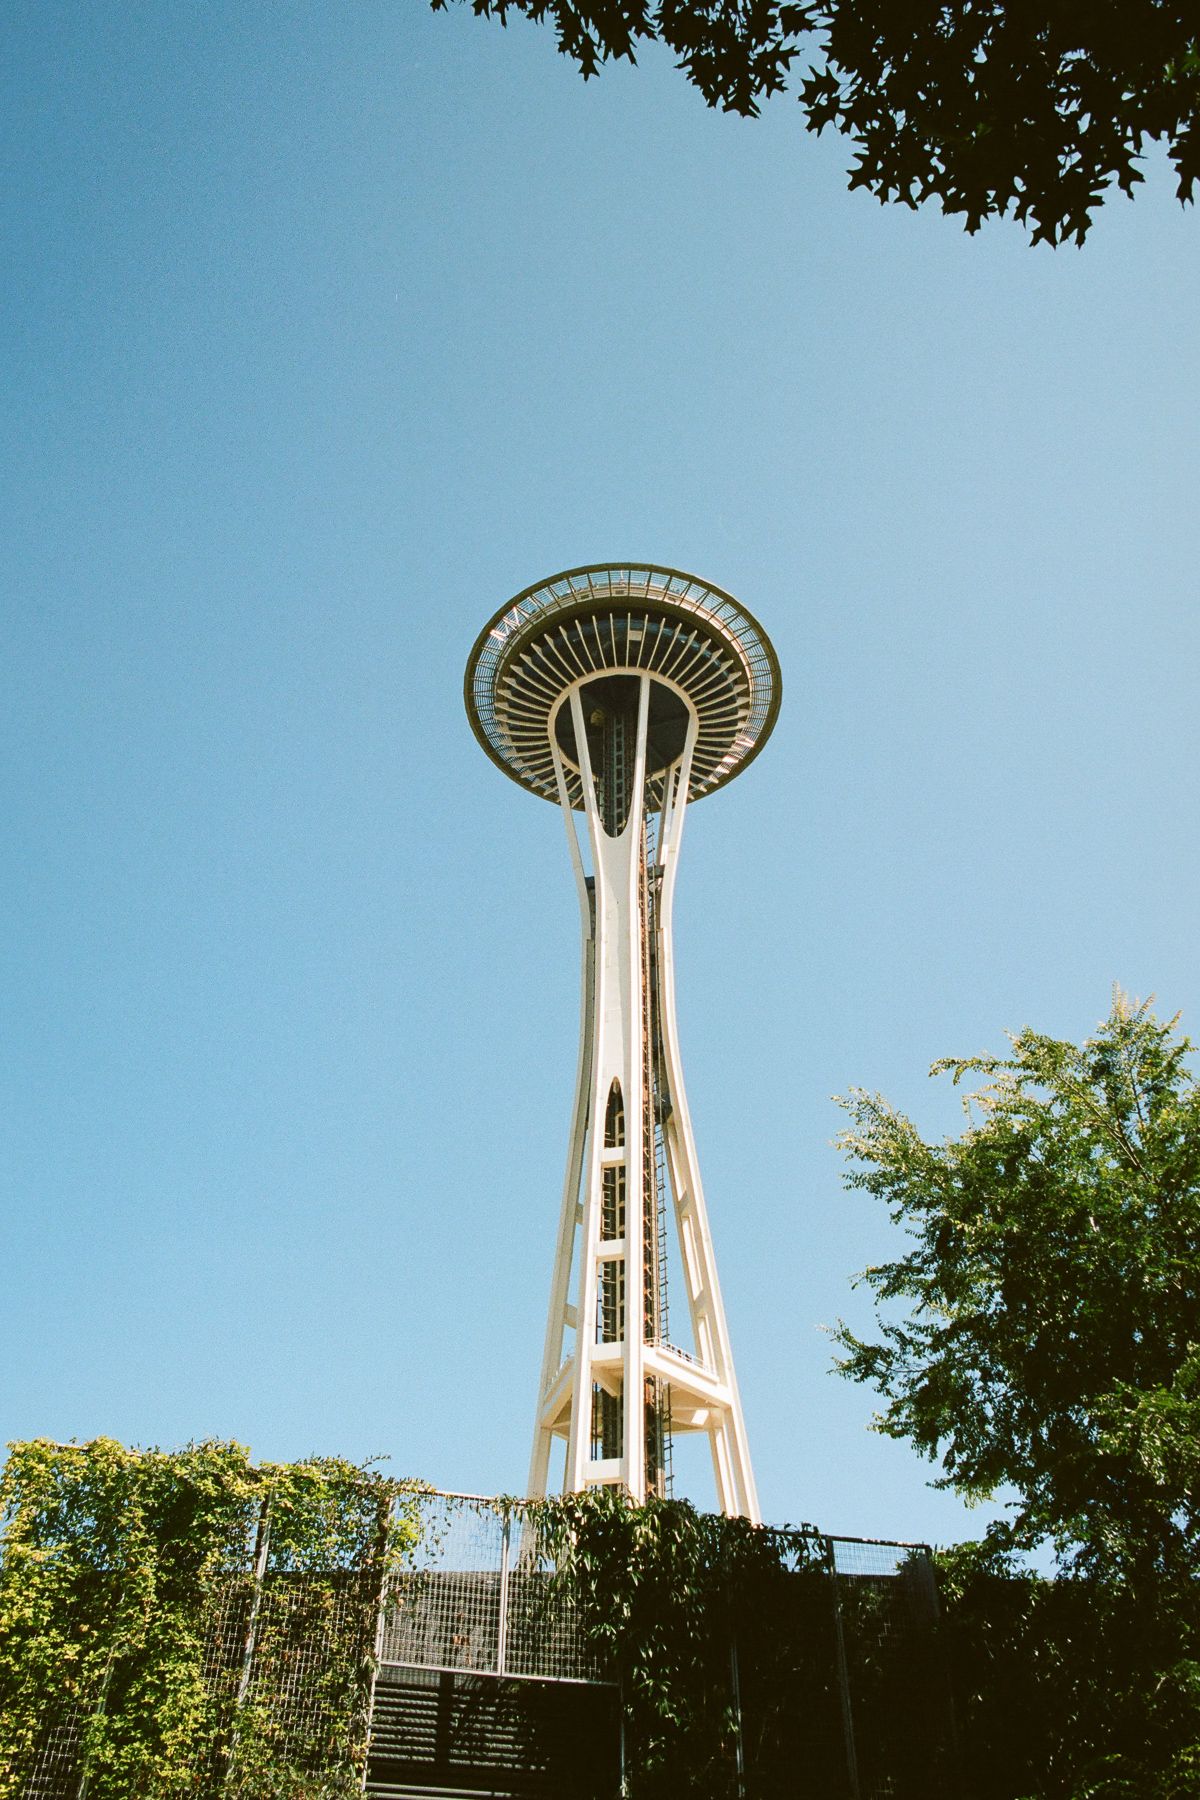 Looking up at the Space Needle.